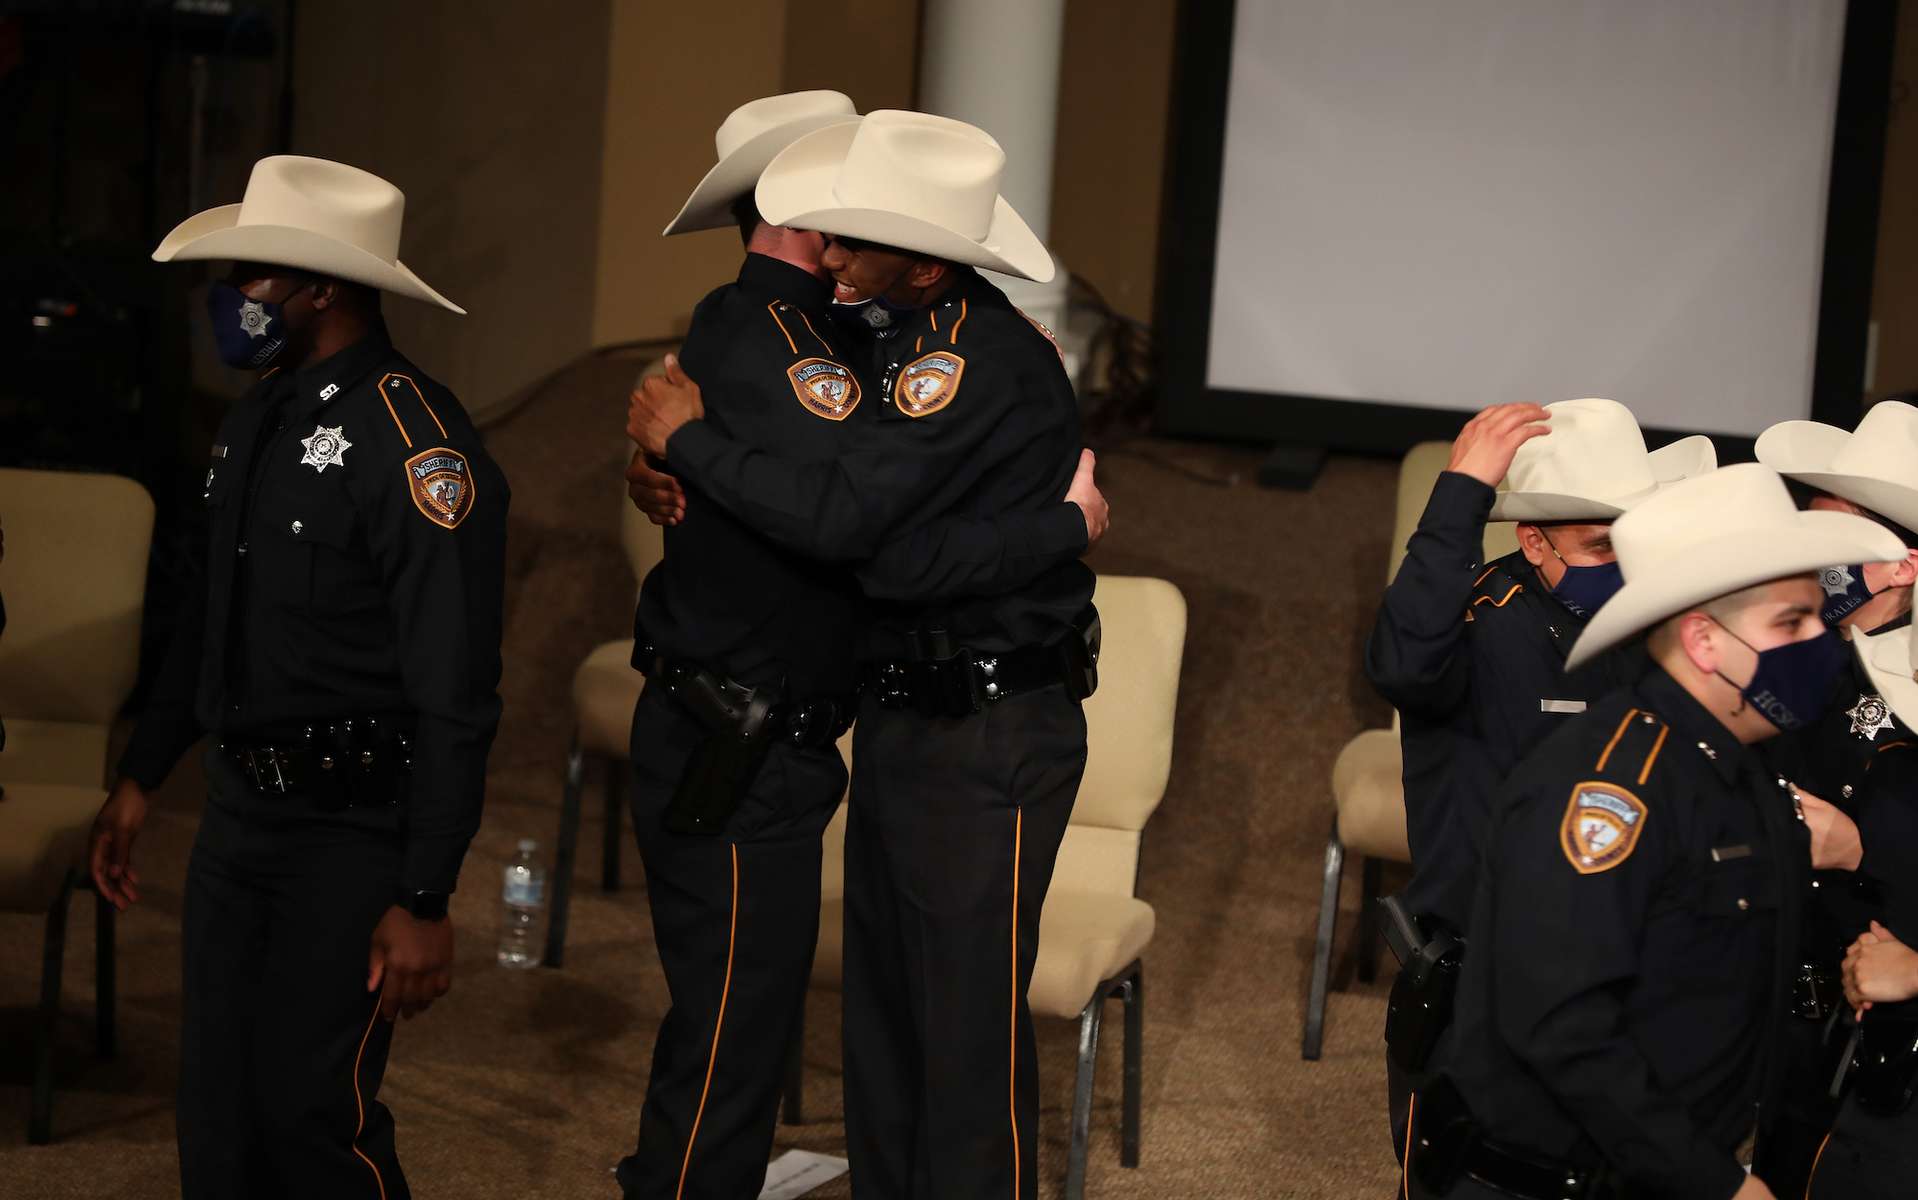 After six months of Basic Peace Officer Course training, we welcomed 60 new deputies to our HCSO family on January 26, 2021.The B1-2020 class kept going in the face of unimaginable challenges: a pandemic and the sudden and heartbreaking loss of their classmate, Cadet Cornelius Anderson.